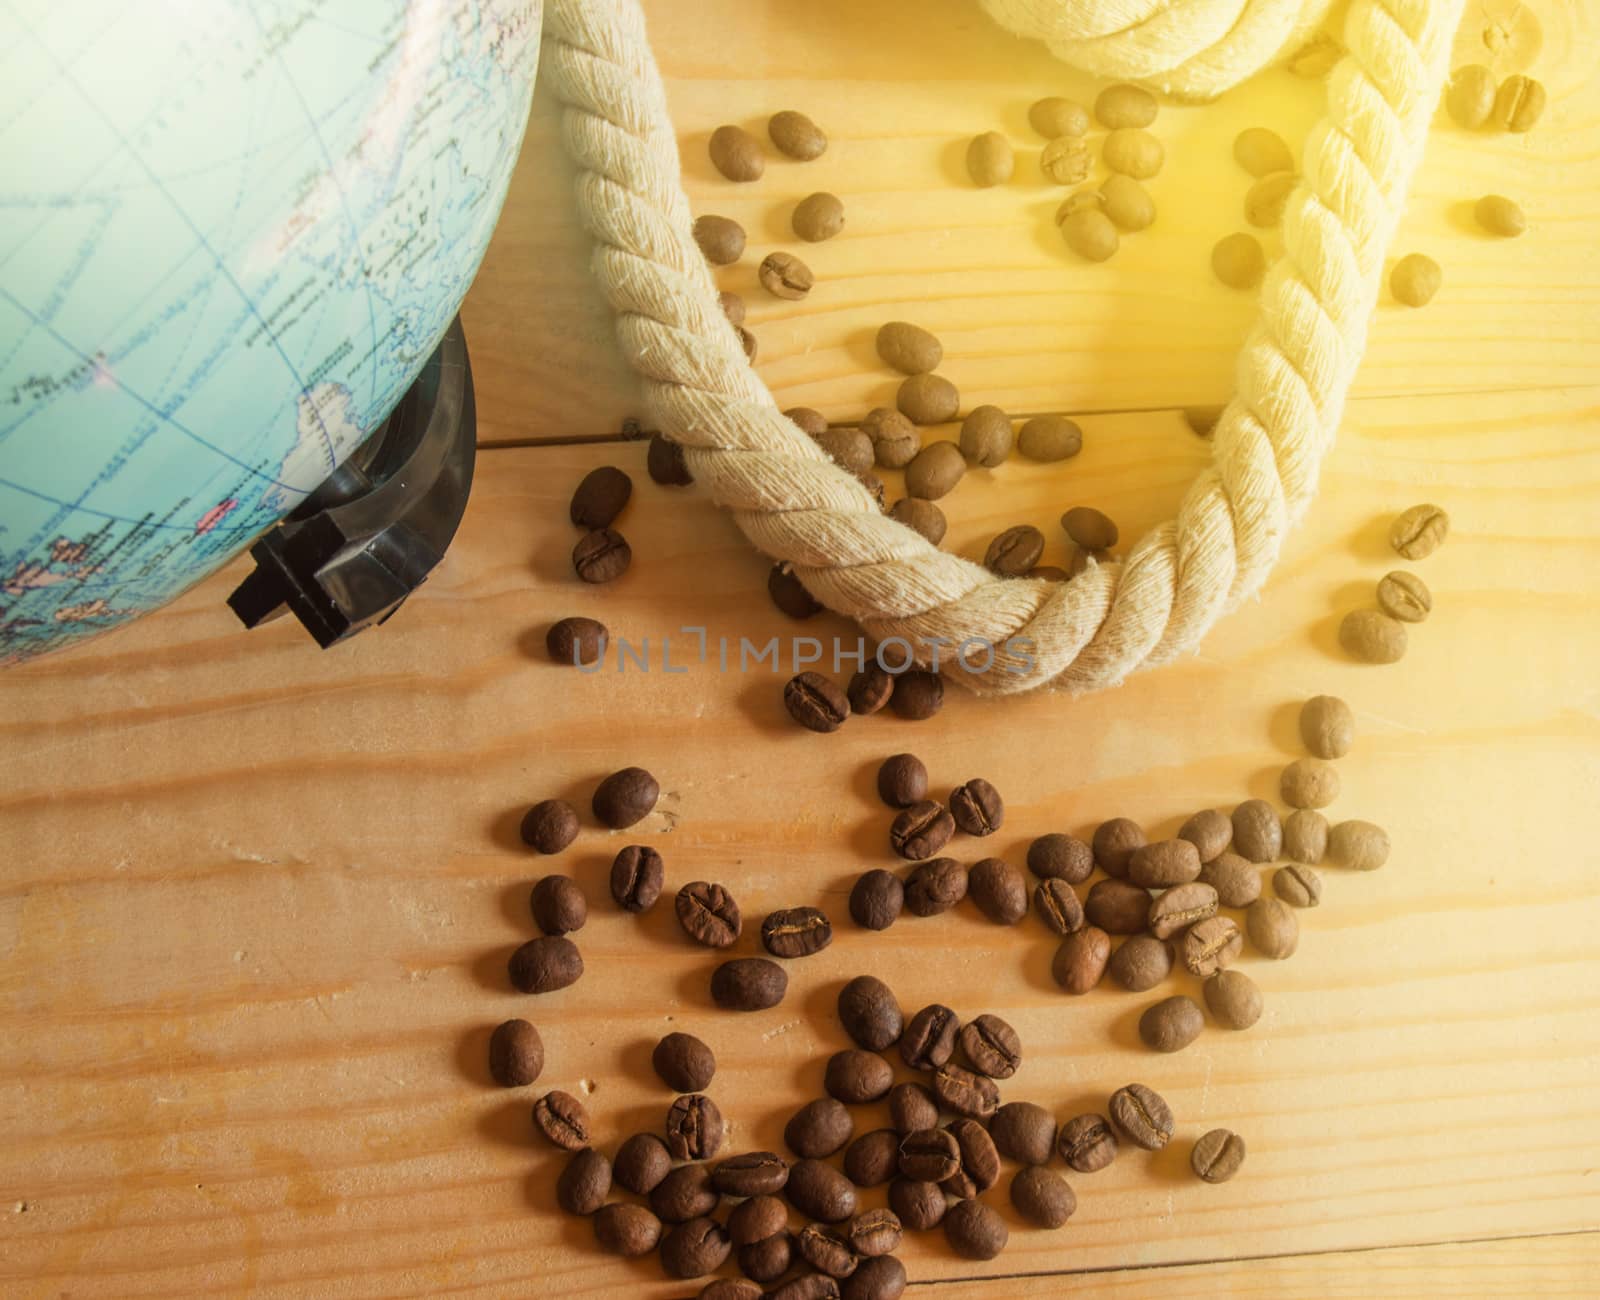 Happy OPENING day of Columbus. A globe, a rope, coffee beans on a wooden Board, SOLAR LIGHT.